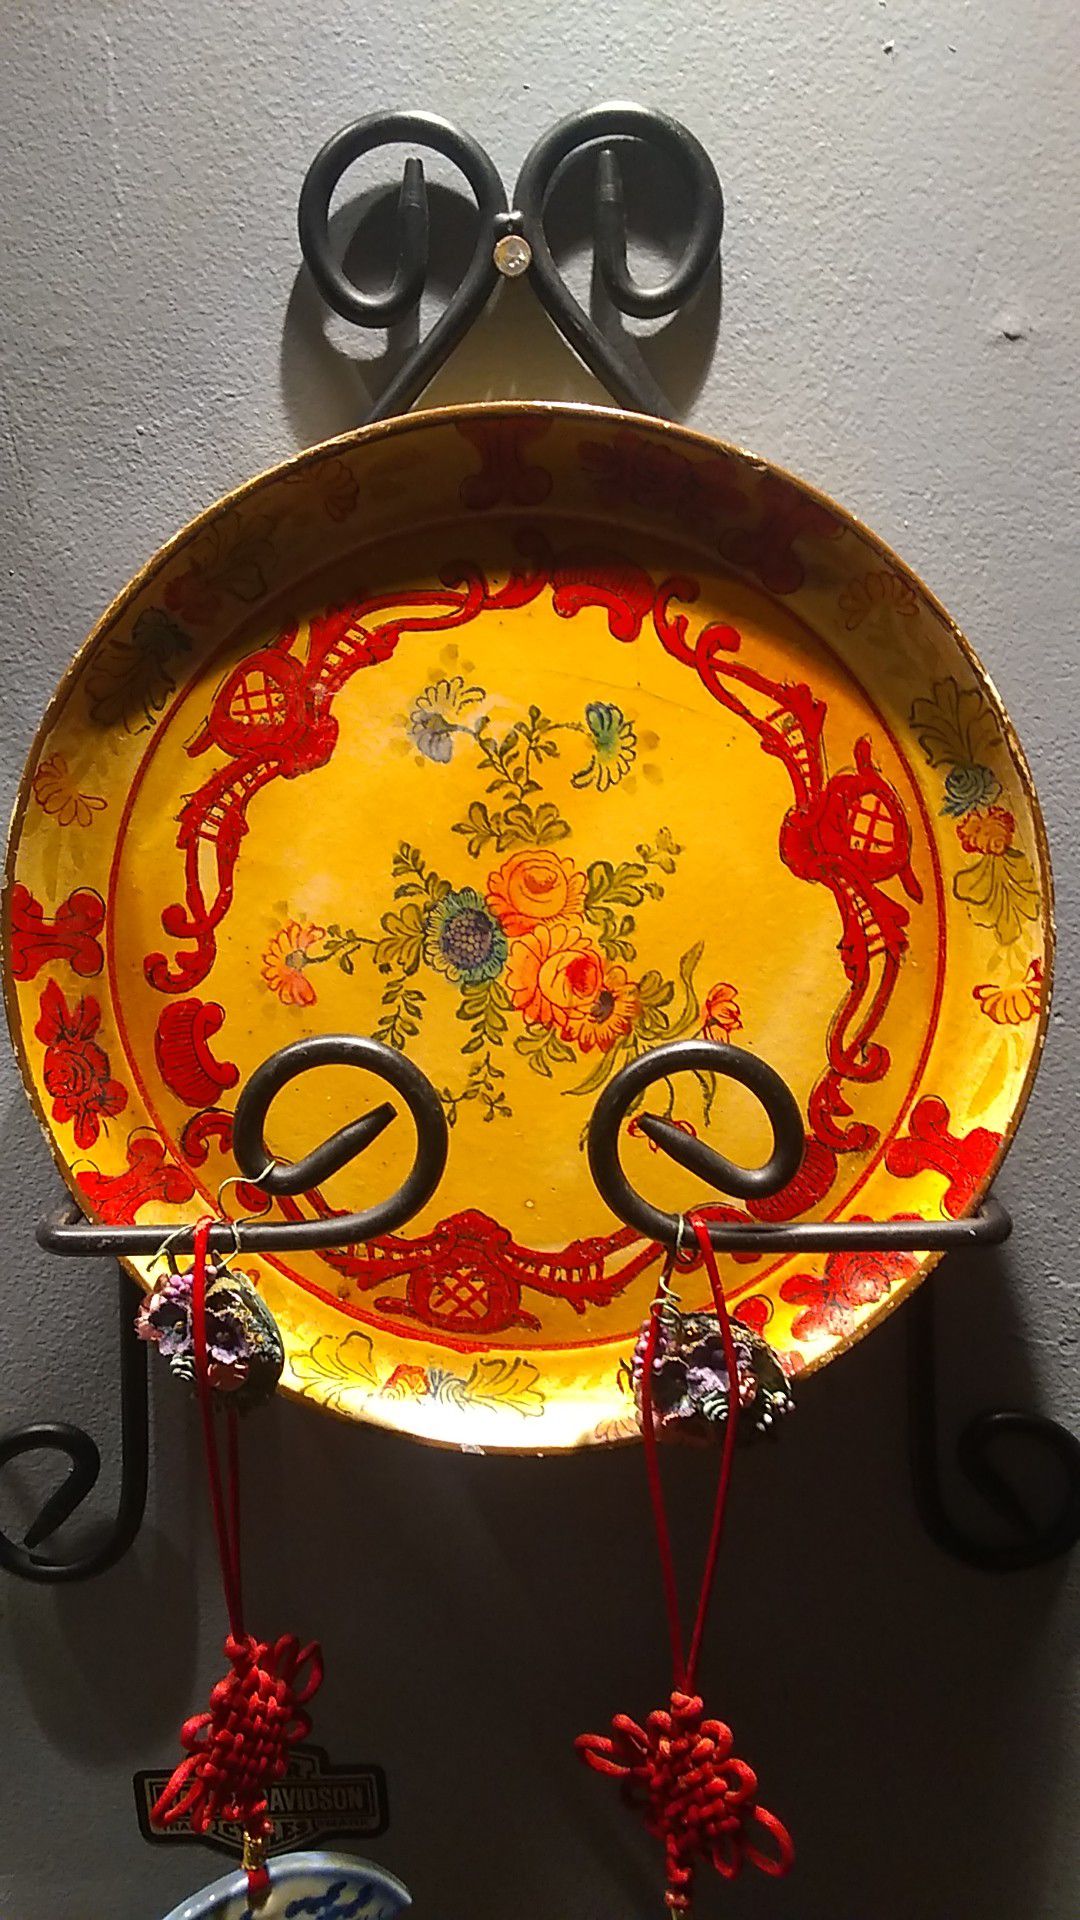 Japanese (hand painted) plate